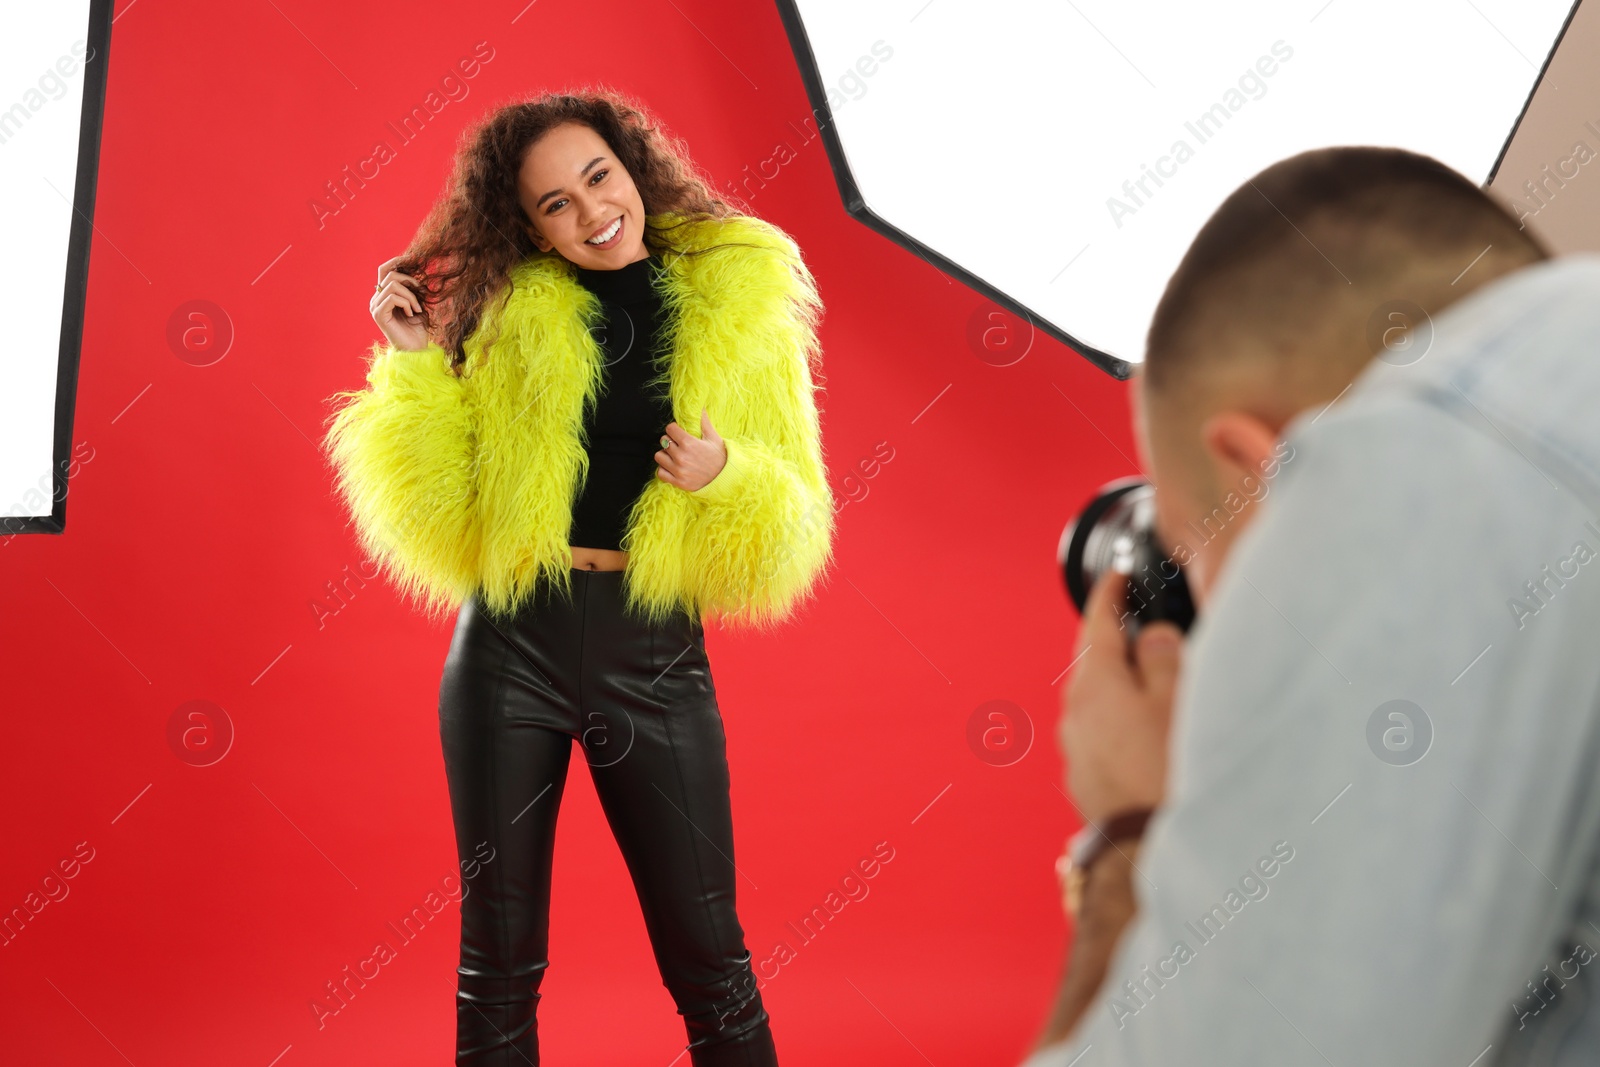 Photo of Beautiful African American model posing for professional photographer in studio